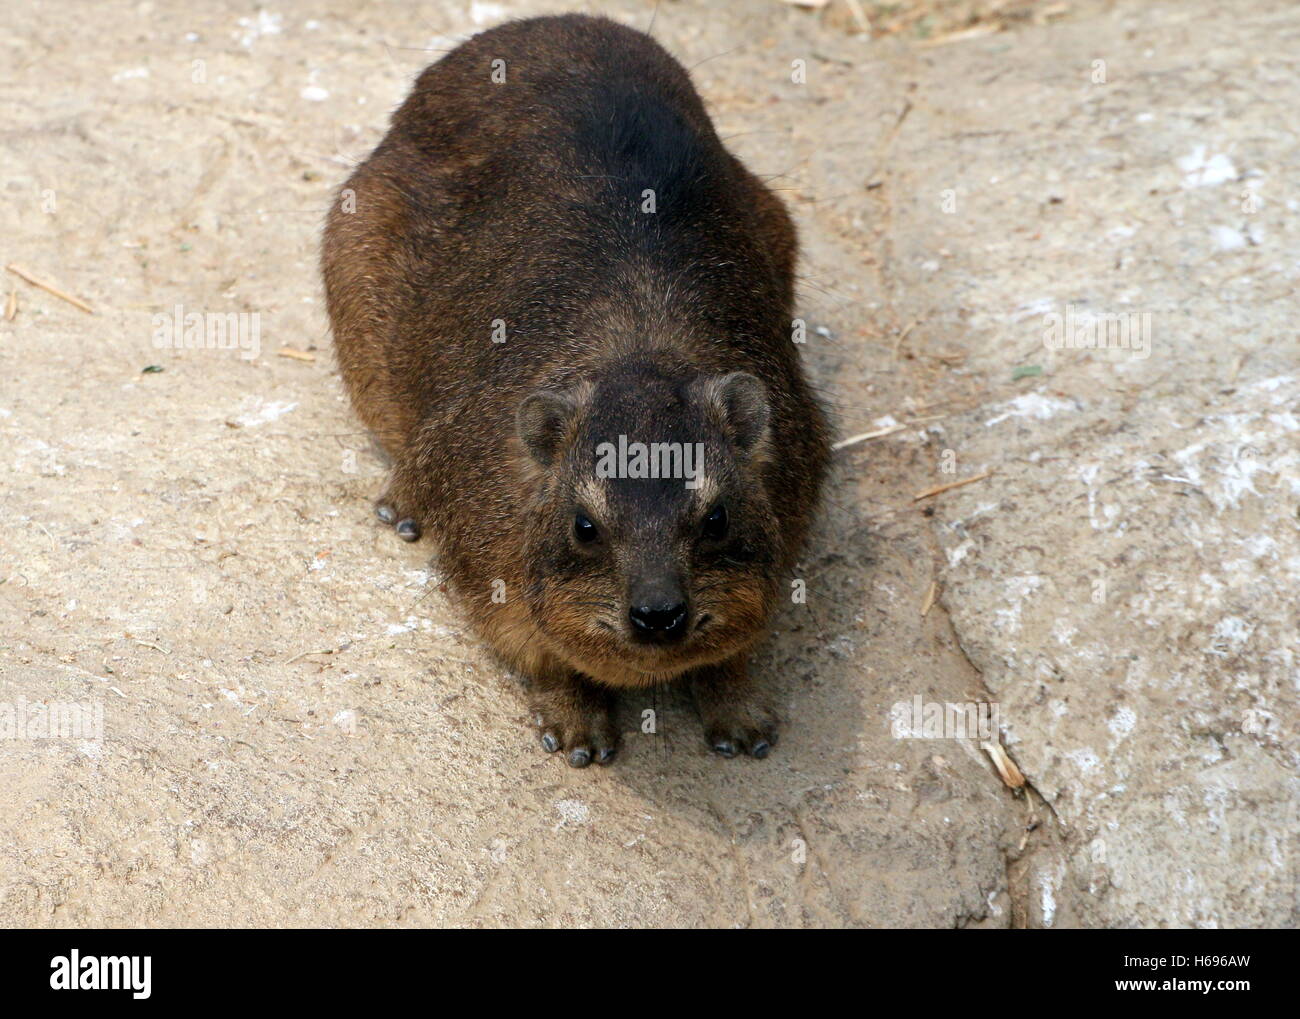 South African Cape Hyrax  (Procavia capensis)  facing the camera. A.k.a. Rock badger or 'Dassie' Stock Photo